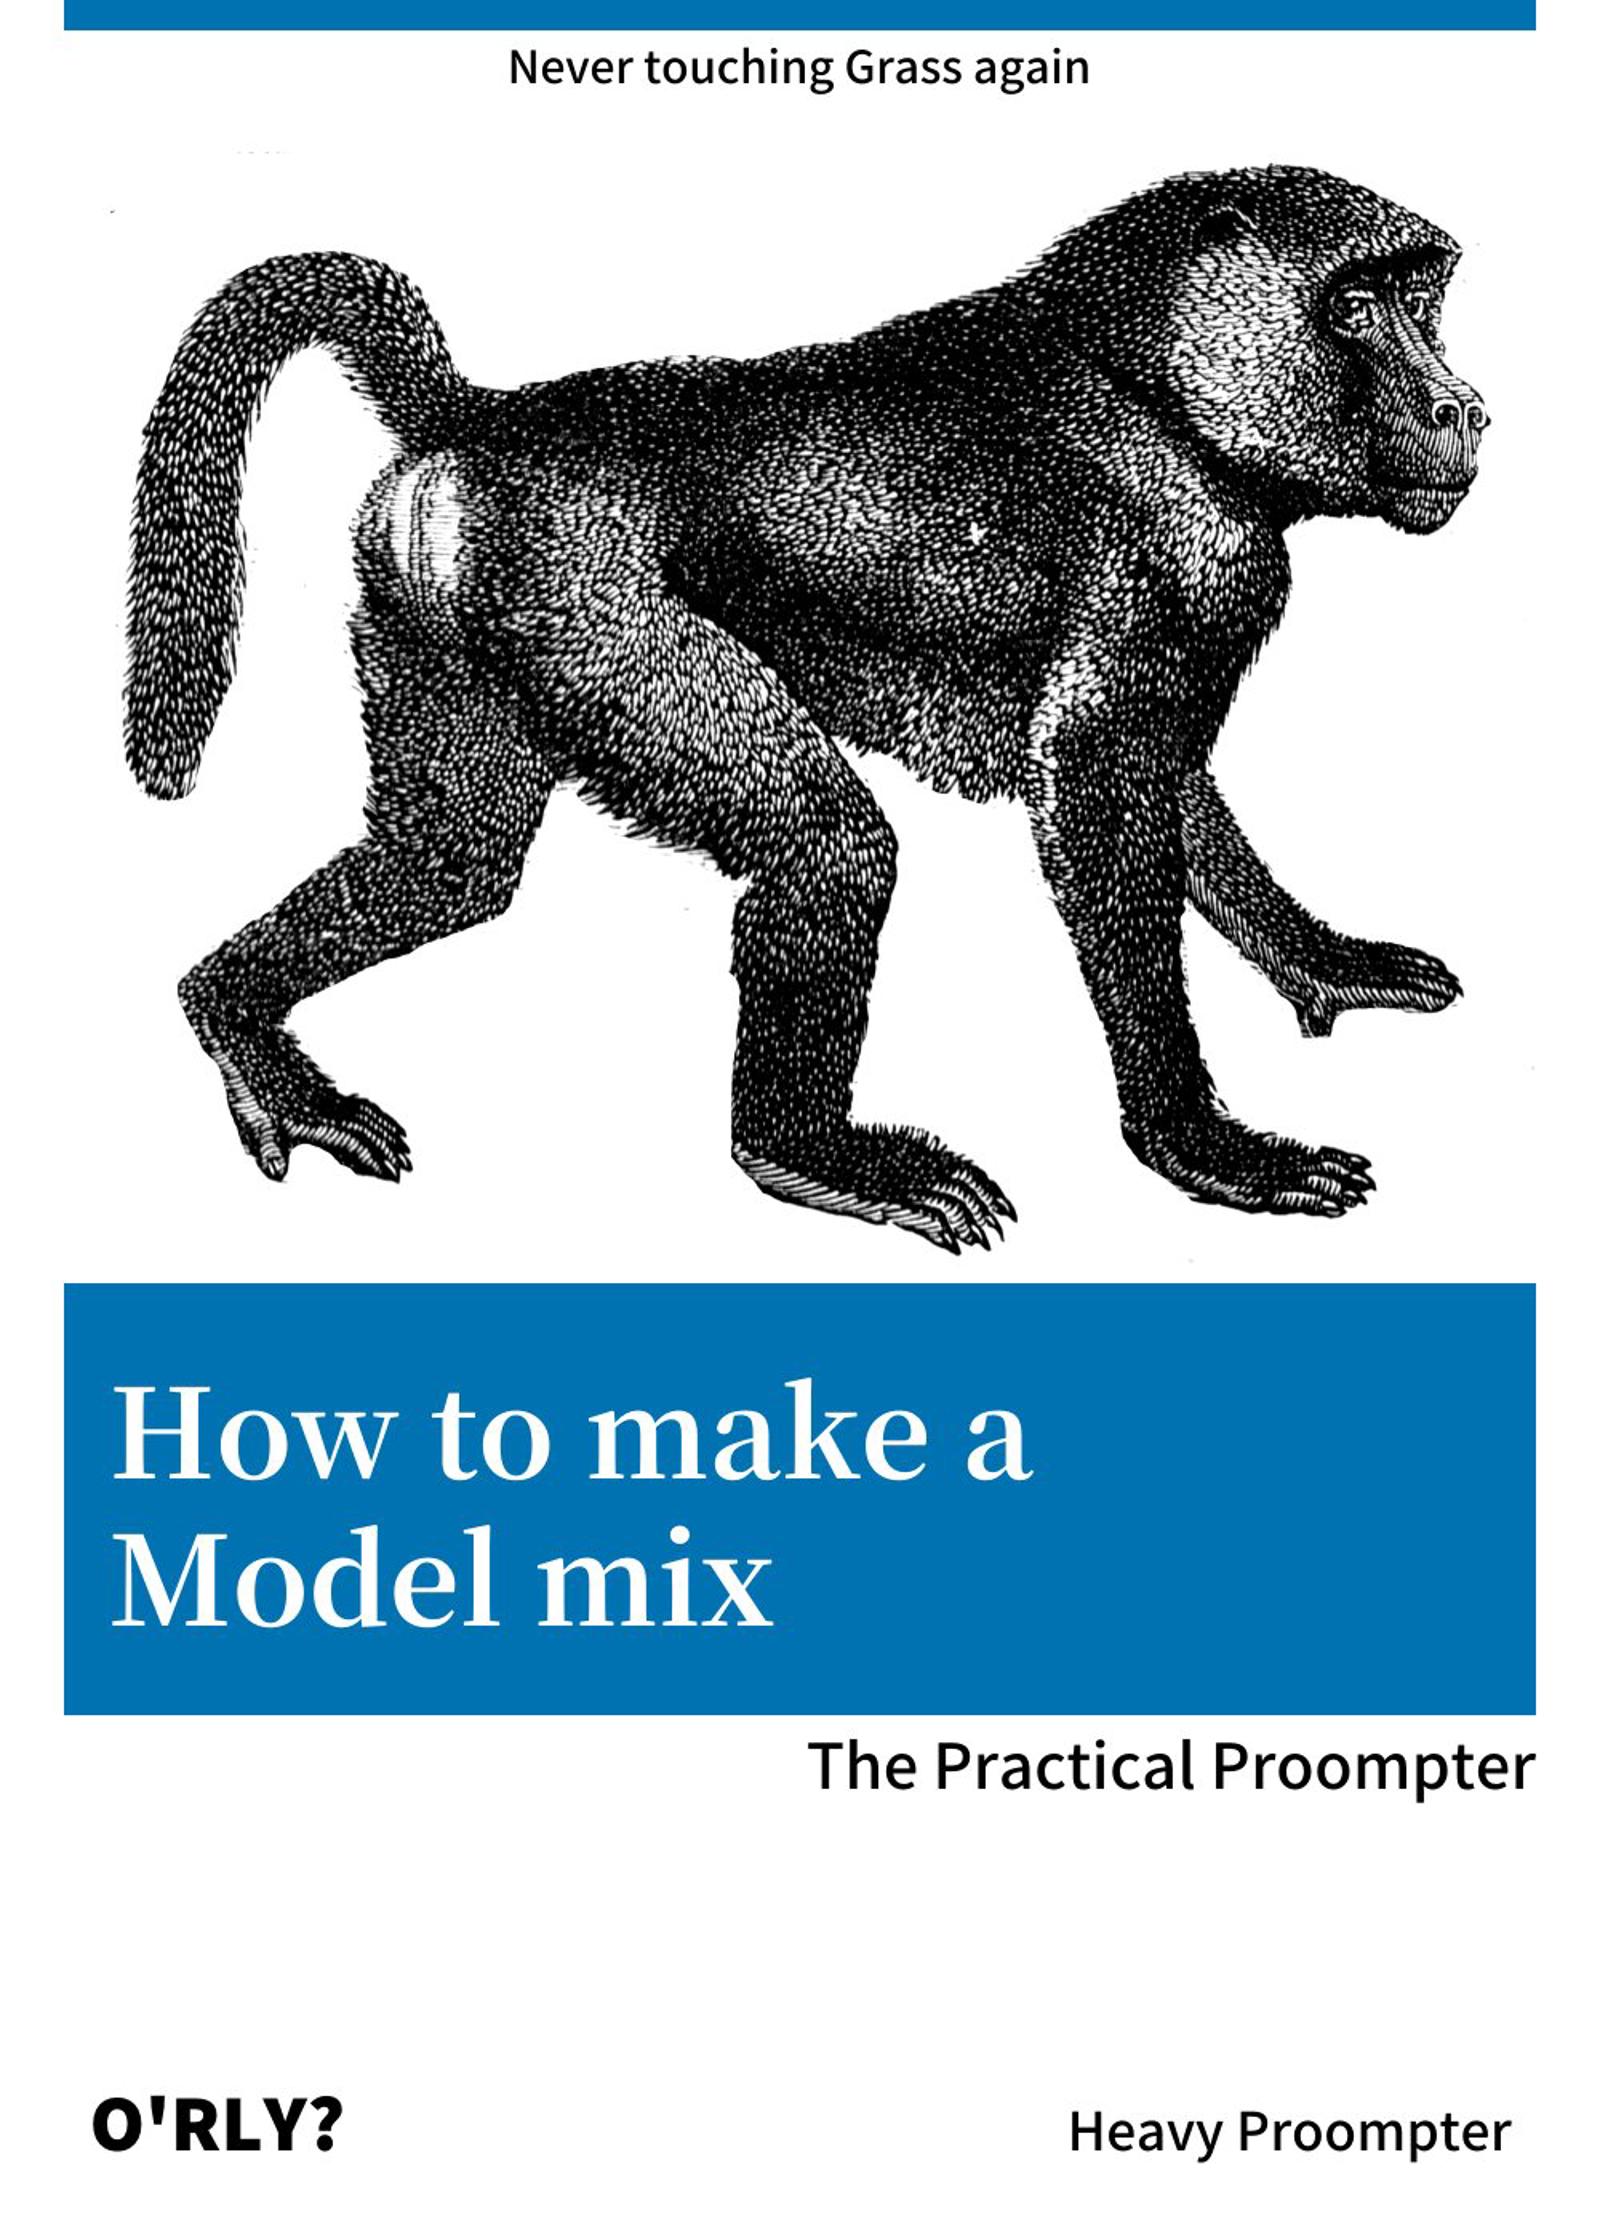 How to make a Model mix | The Practical Proompter